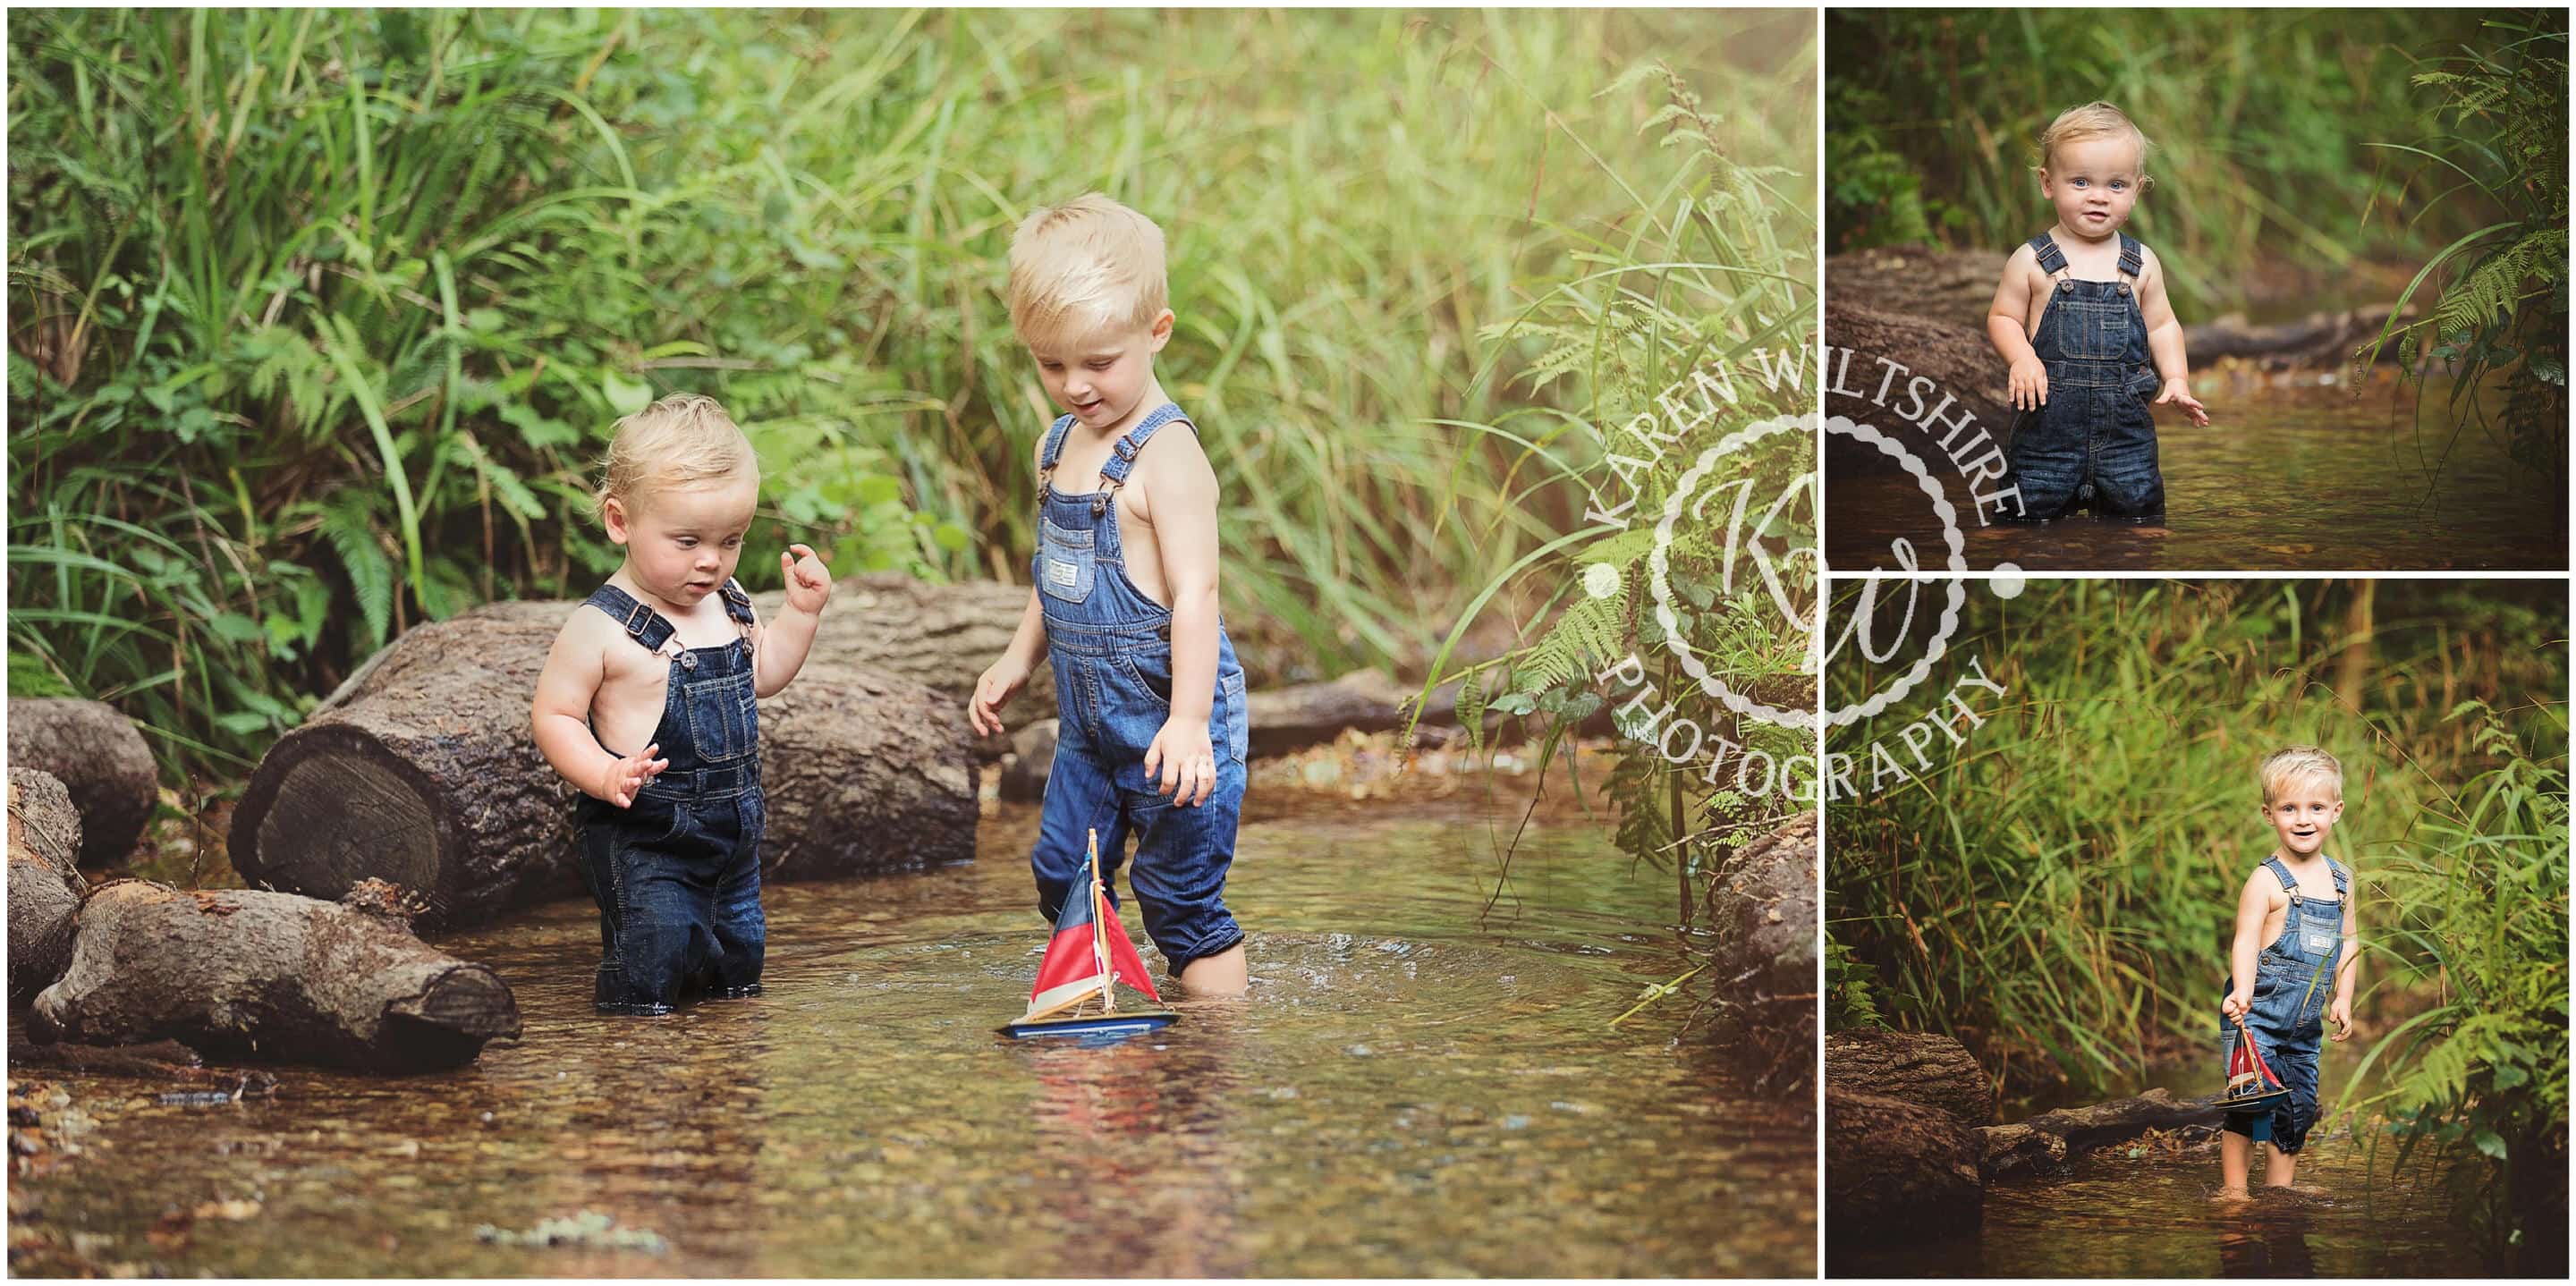 Little boy fishing vintage photography session  Vintage kids photography,  Fishing photo shoot, Photography mini sessions